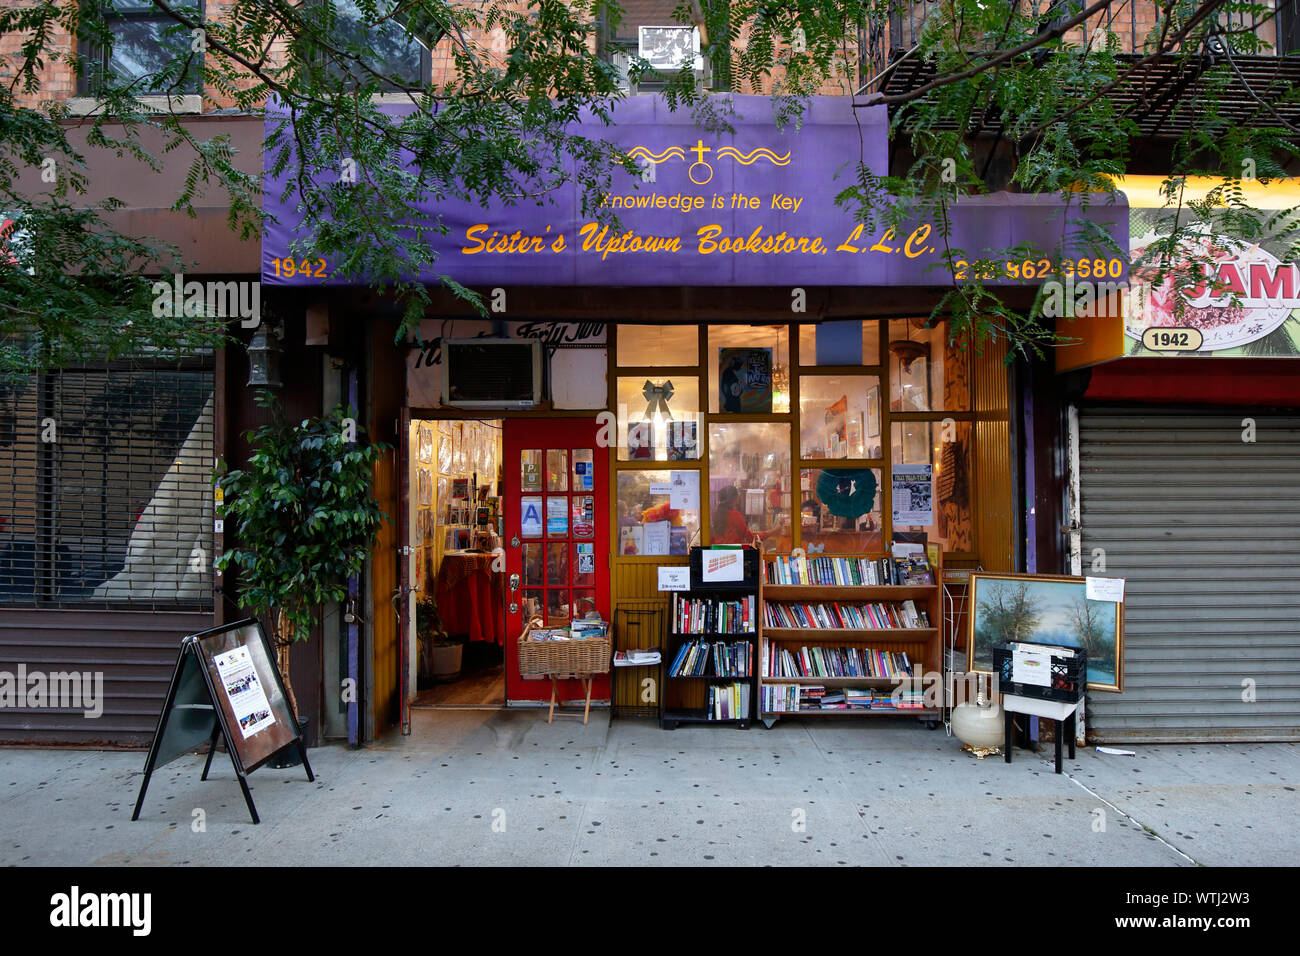 Sister's Uptown Bookstore, 1942 Amsterdam Avenue, New York, NY. exterior storefront of a bookstore, community space in Harlem in Manhattan. Stock Photo